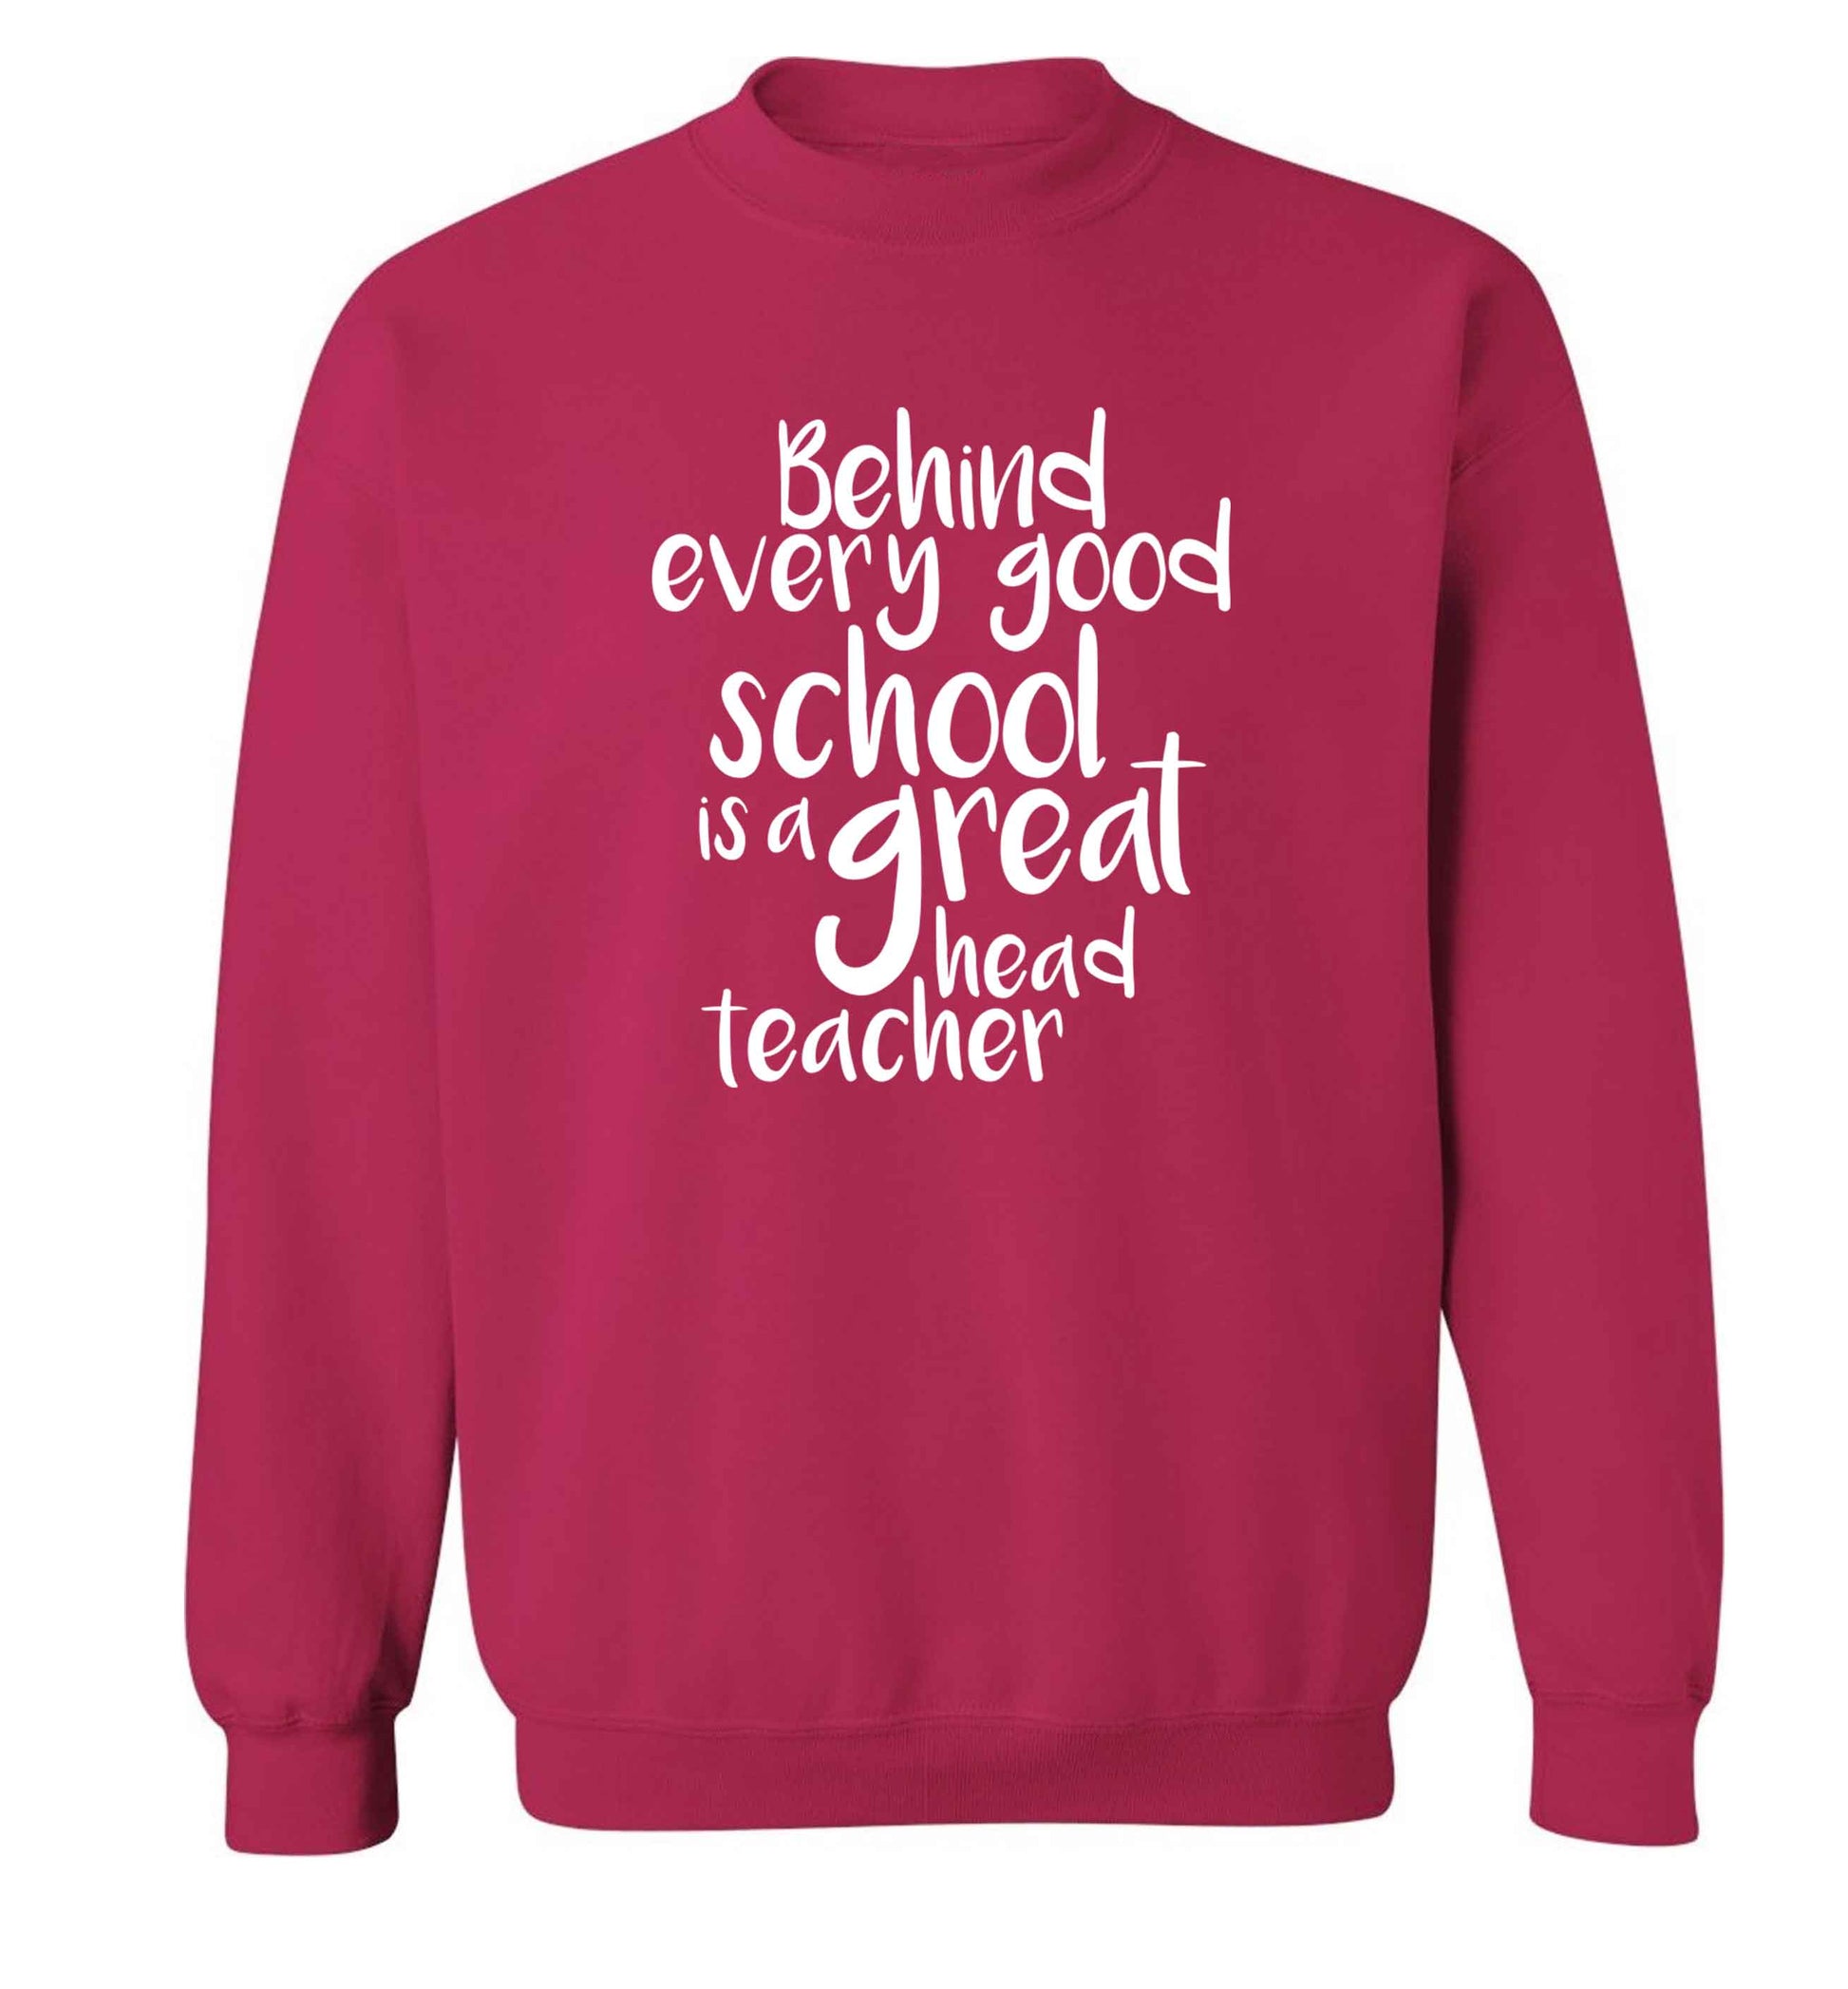 Behind every good school is a great head teacher adult's unisex pink sweater 2XL